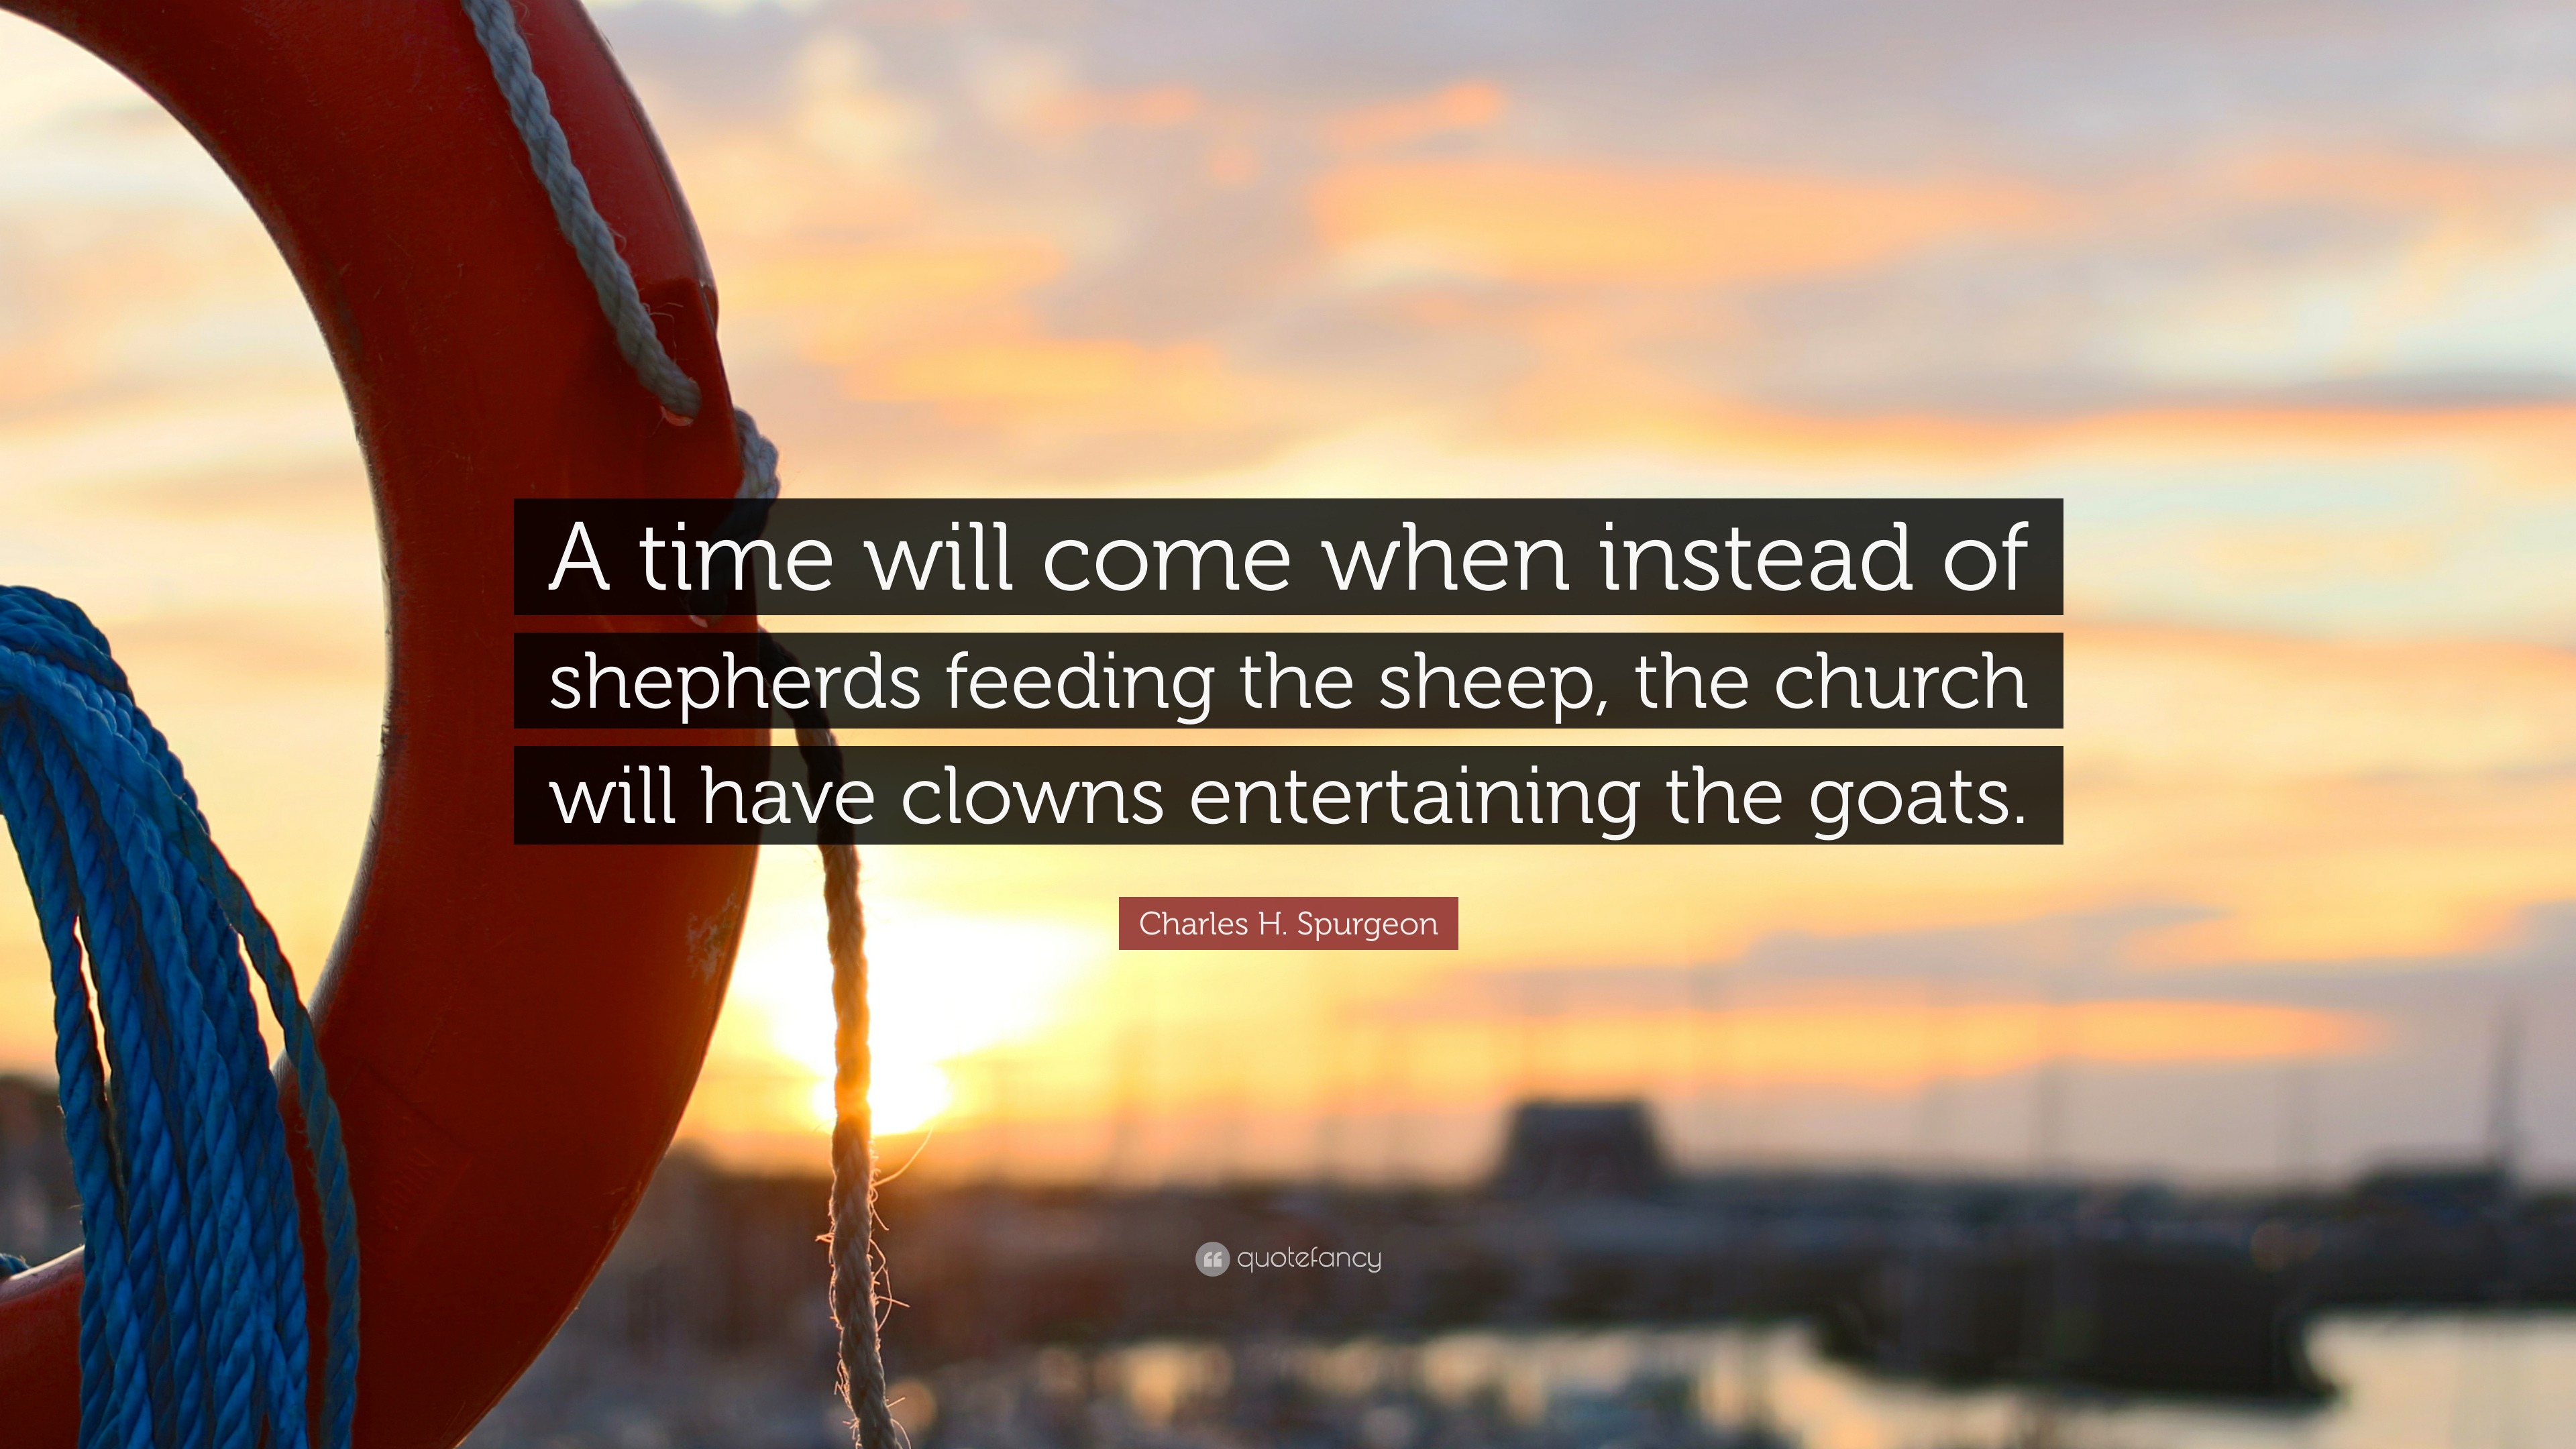 a time will come a time when instead of shepherds